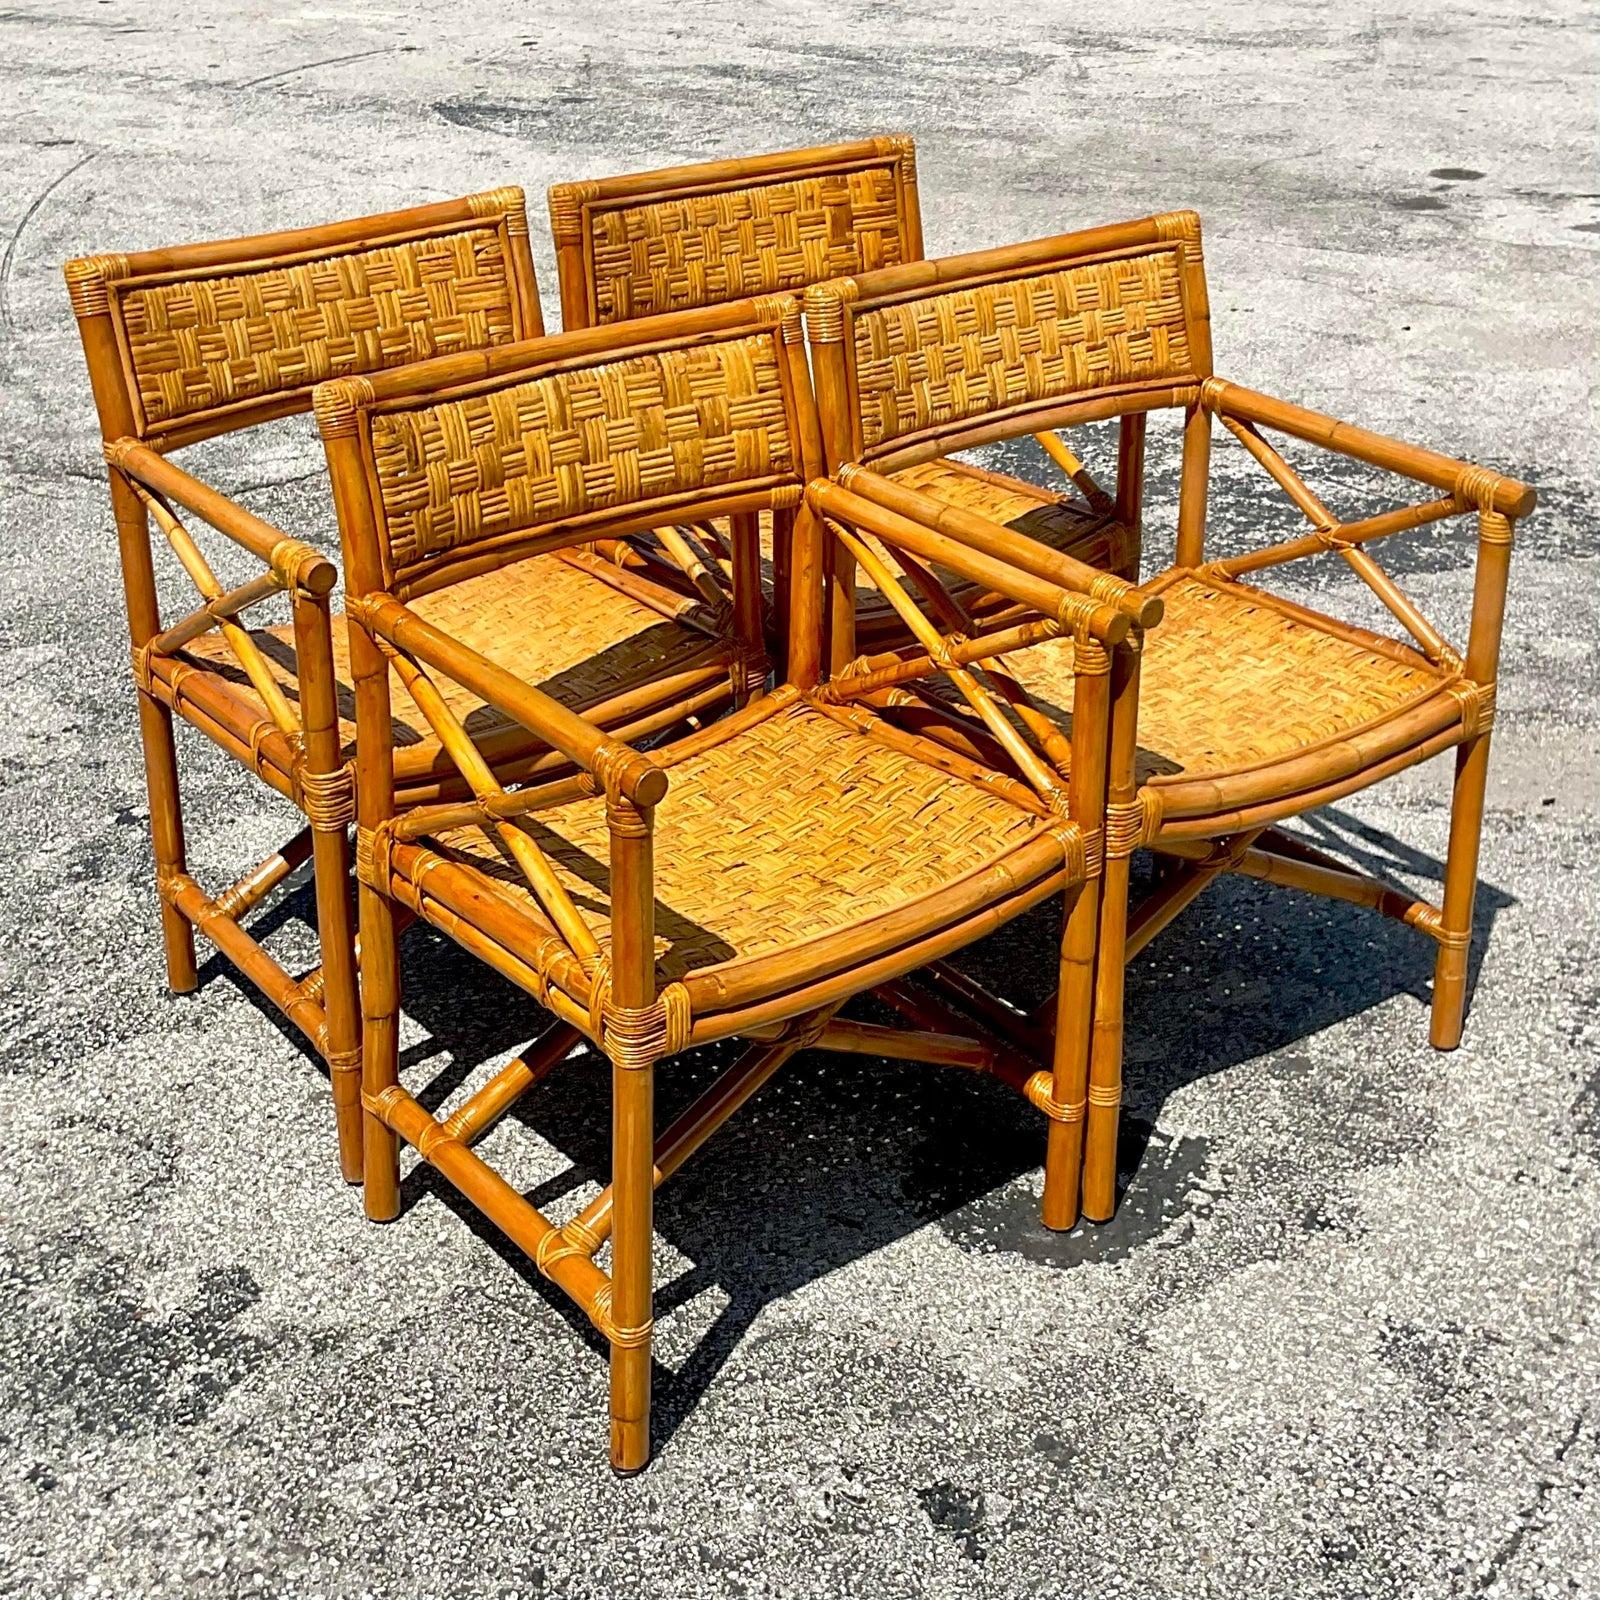 Vintage Coastal Woven Rattan Directors Chairs - Set of 4 In Good Condition For Sale In west palm beach, FL